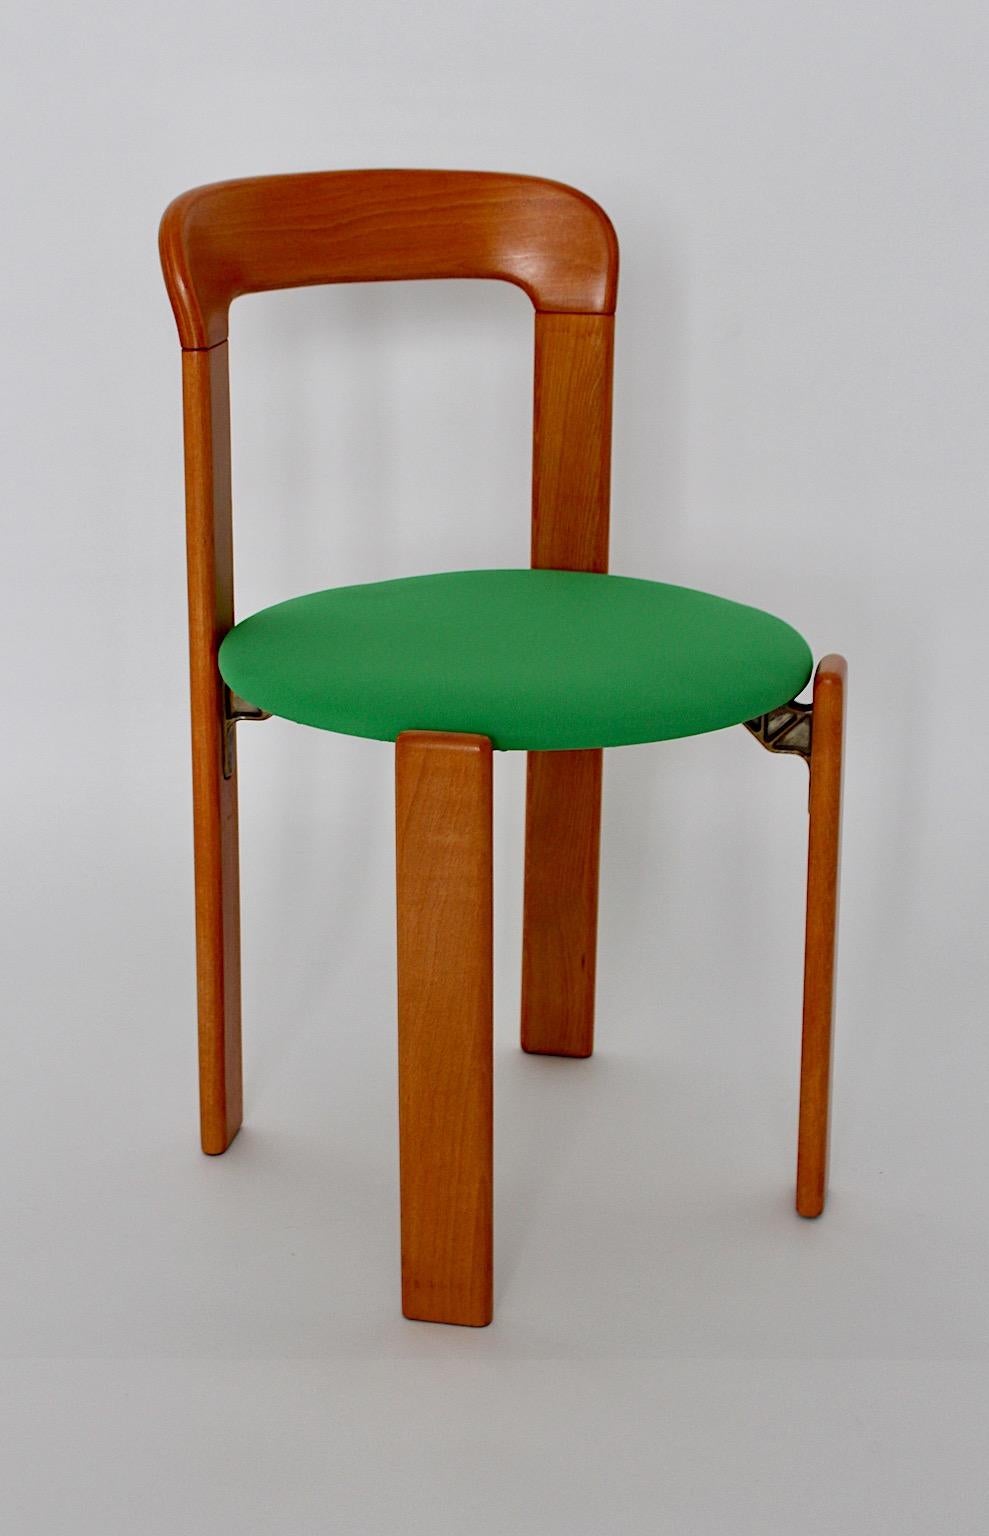 Bruno Rey six ( 6 ) vintage dining chairs or chairs designed 1970s Switzerland and executed by Dietiker.
These dining room chairs were made of solid beech, laminated plywood beech and cast aluminum.
The stackable dining chairs by Bruno Rey were